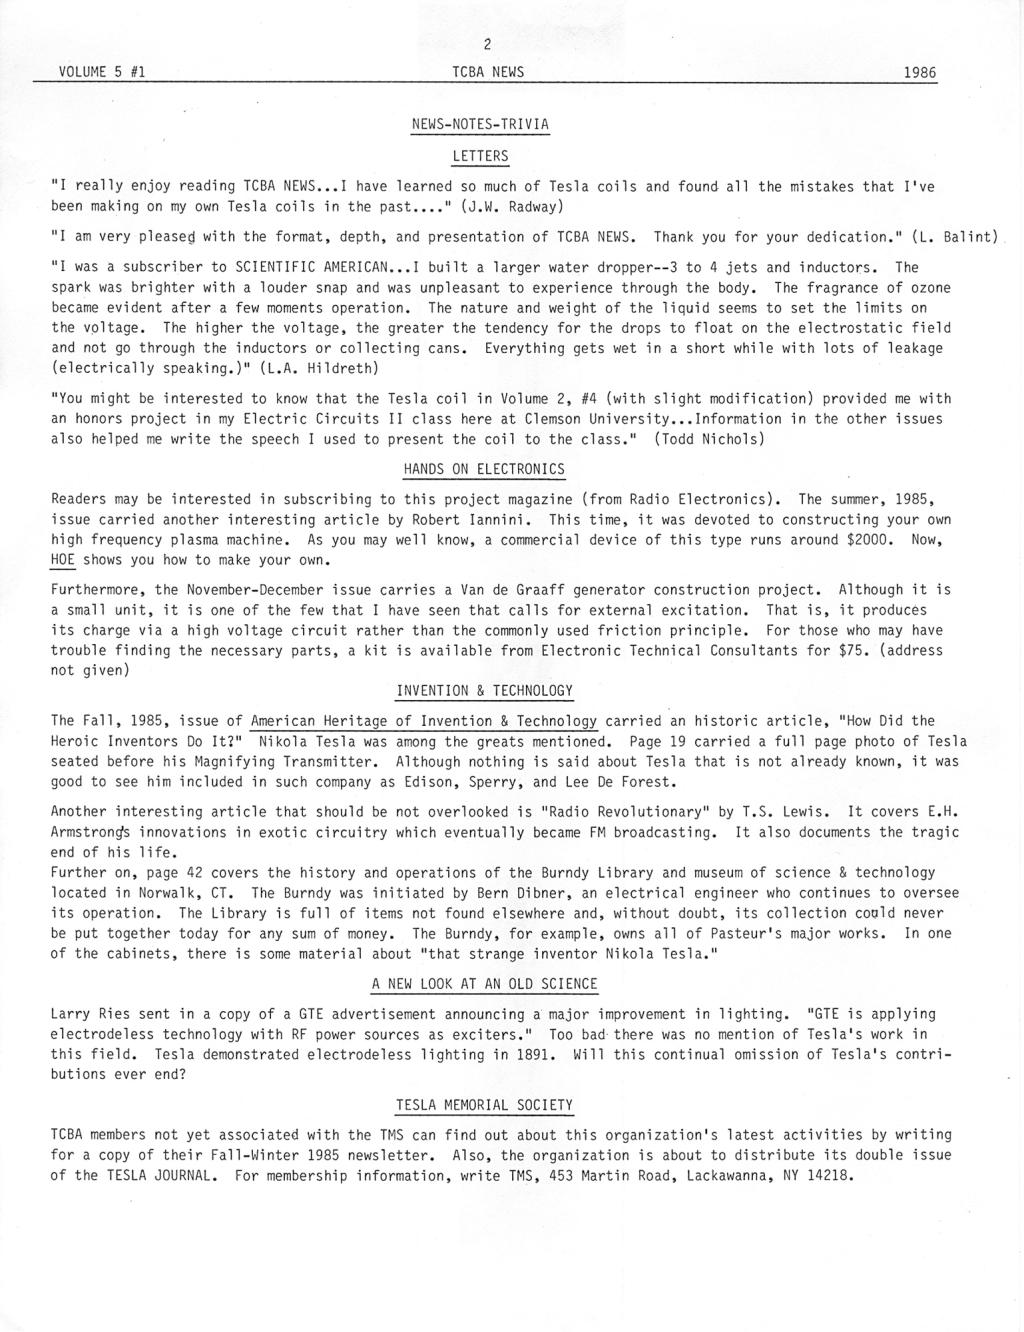 TCBA Volume 5 - Issue 1 - Page 2 of 18